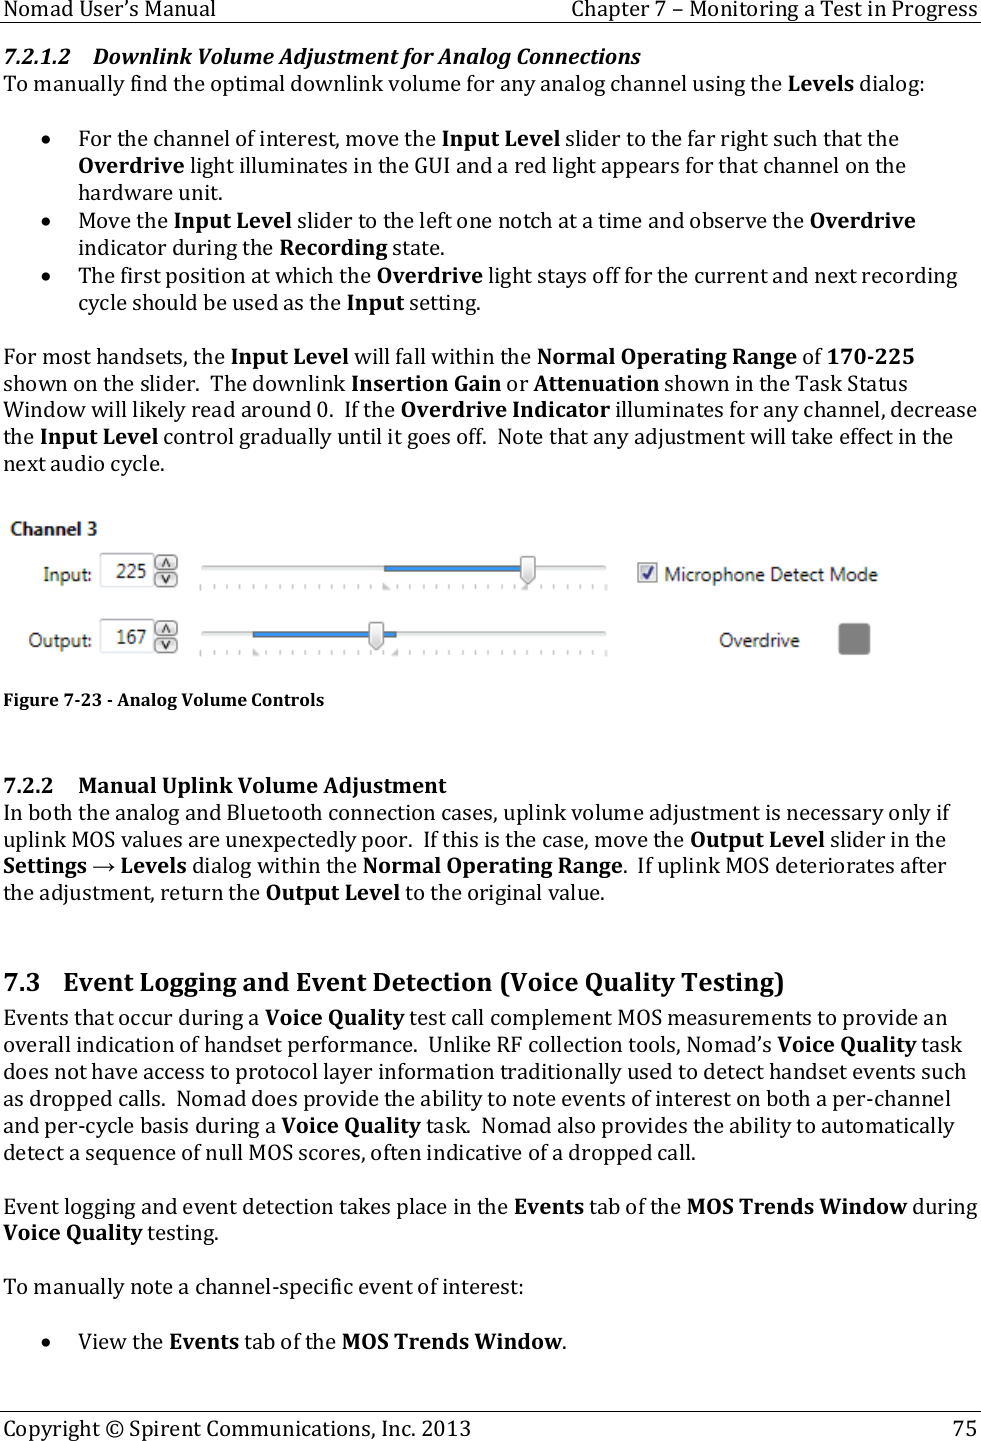  Nomad User’s Manual  Chapter 7 – Monitoring a Test in Progress Copyright © Spirent Communications, Inc. 2013    75  7.2.1.2 Downlink Volume Adjustment for Analog Connections To manually find the optimal downlink volume for any analog channel using the Levels dialog:   For the channel of interest, move the Input Level slider to the far right such that the Overdrive light illuminates in the GUI and a red light appears for that channel on the hardware unit.  Move the Input Level slider to the left one notch at a time and observe the Overdrive indicator during the Recording state.  The first position at which the Overdrive light stays off for the current and next recording cycle should be used as the Input setting.  For most handsets, the Input Level will fall within the Normal Operating Range of 170-225 shown on the slider.  The downlink Insertion Gain or Attenuation shown in the Task Status Window will likely read around 0.  If the Overdrive Indicator illuminates for any channel, decrease the Input Level control gradually until it goes off.  Note that any adjustment will take effect in the next audio cycle.   Figure 7-23 - Analog Volume Controls  7.2.2 Manual Uplink Volume Adjustment In both the analog and Bluetooth connection cases, uplink volume adjustment is necessary only if uplink MOS values are unexpectedly poor.  If this is the case, move the Output Level slider in the Settings → Levels dialog within the Normal Operating Range.  If uplink MOS deteriorates after the adjustment, return the Output Level to the original value.  7.3 Event Logging and Event Detection (Voice Quality Testing) Events that occur during a Voice Quality test call complement MOS measurements to provide an overall indication of handset performance.  Unlike RF collection tools, Nomad’s Voice Quality task does not have access to protocol layer information traditionally used to detect handset events such as dropped calls.  Nomad does provide the ability to note events of interest on both a per-channel and per-cycle basis during a Voice Quality task.  Nomad also provides the ability to automatically detect a sequence of null MOS scores, often indicative of a dropped call.    Event logging and event detection takes place in the Events tab of the MOS Trends Window during Voice Quality testing.  To manually note a channel-specific event of interest:   View the Events tab of the MOS Trends Window.  